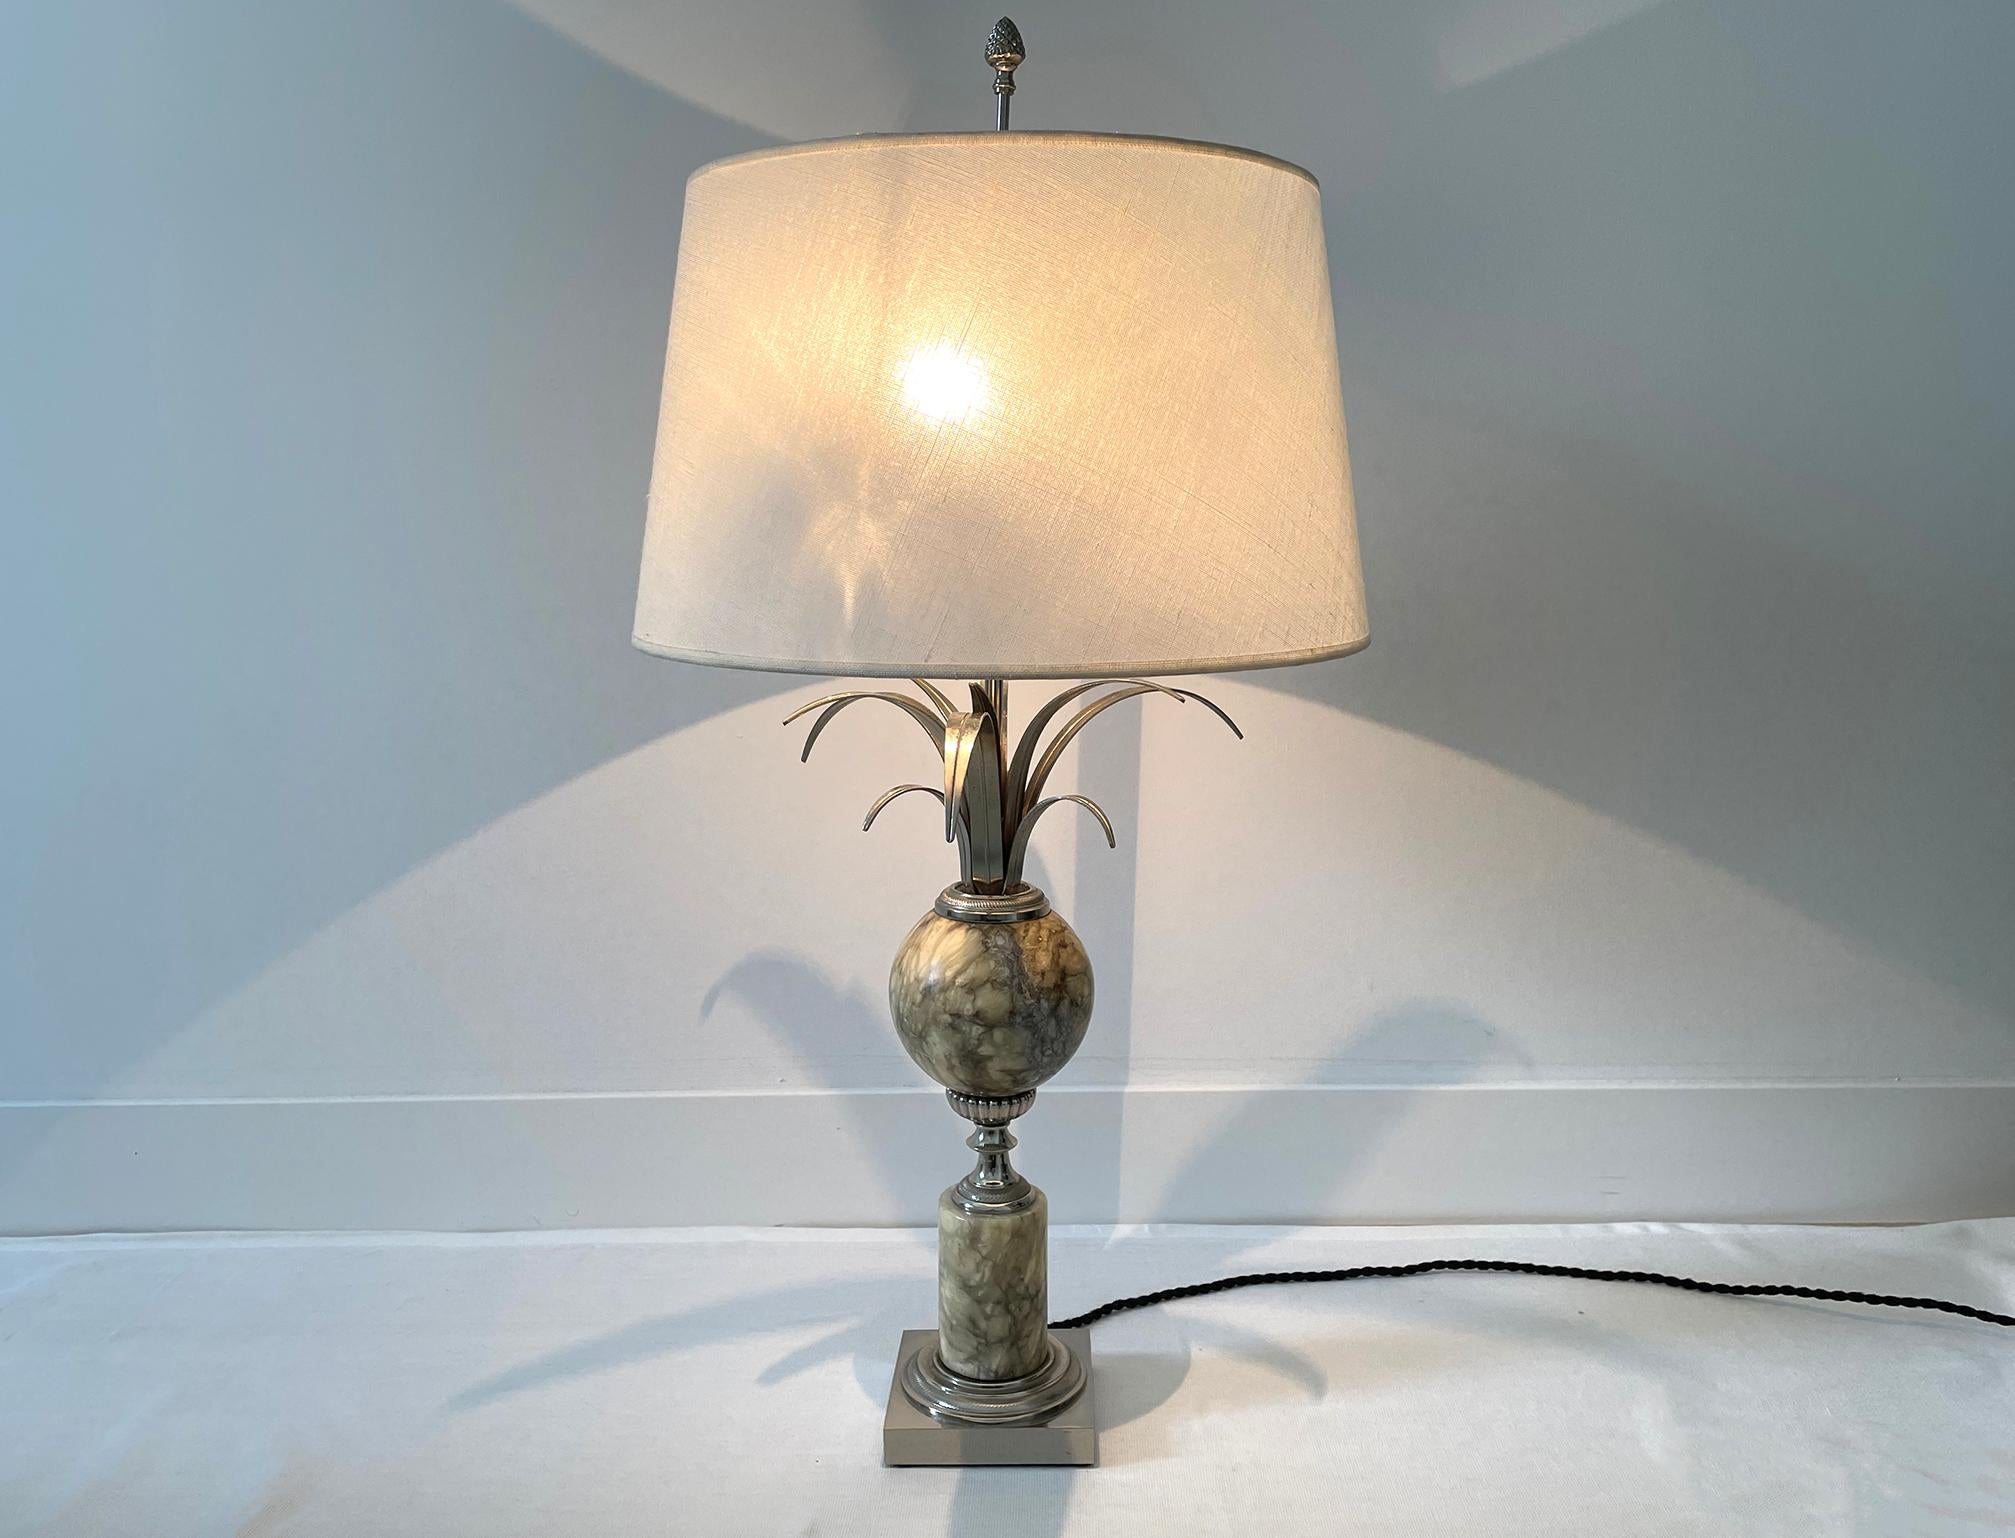 A table lamp from the 70s, in the style of the Maison Charles, in chrome and nickel-plated metal and the central ball in marbled stone, the wiring is new in black silk cord and the lampshade in off-white linen, it has two light bulbs.